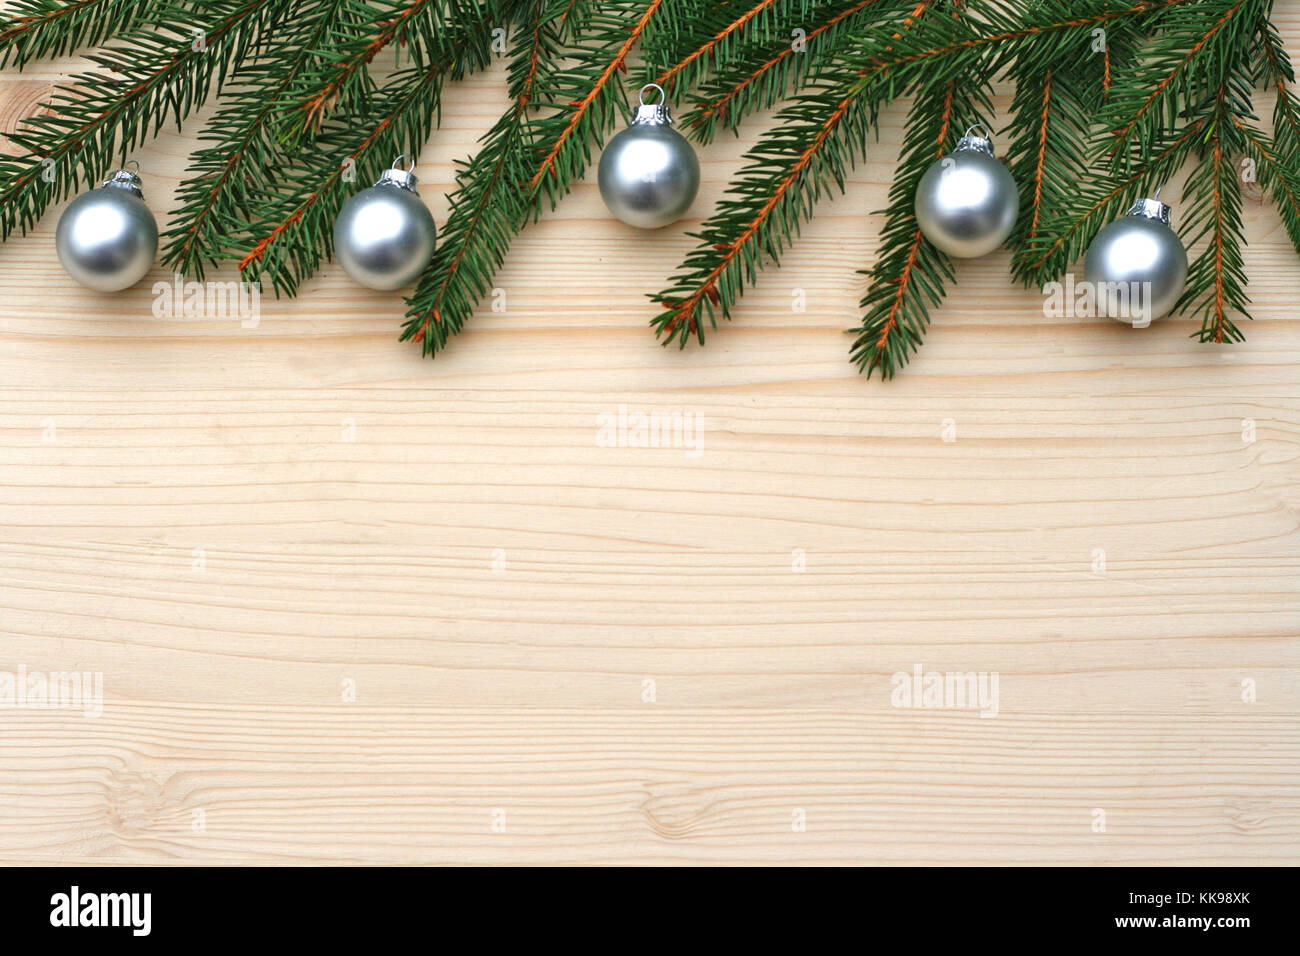 vintage Christmas background with fir branches and silver balls on wood Stock Photo